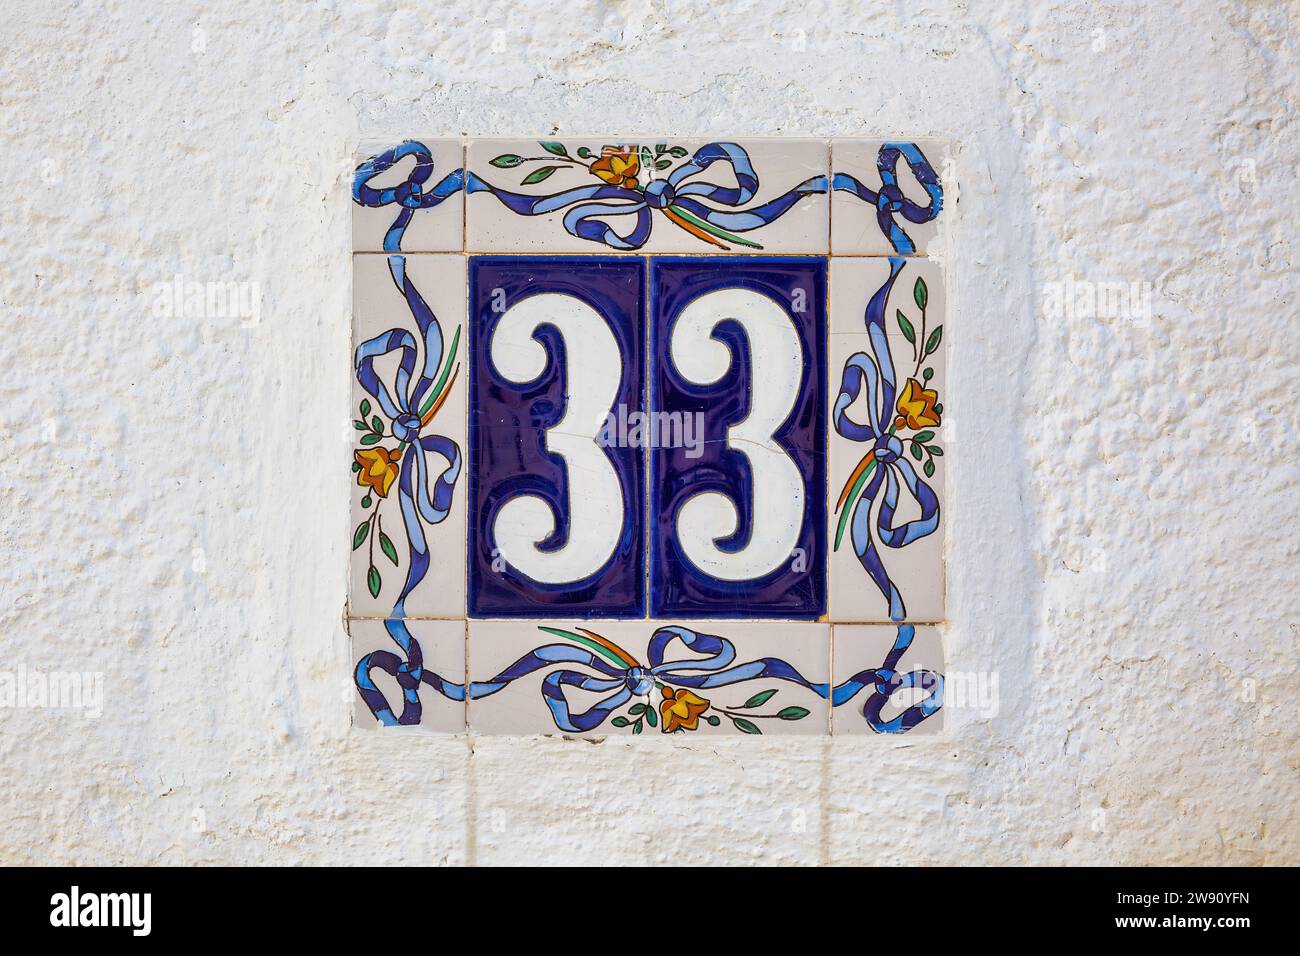 Number 33 House Tile on Wall Stock Photo